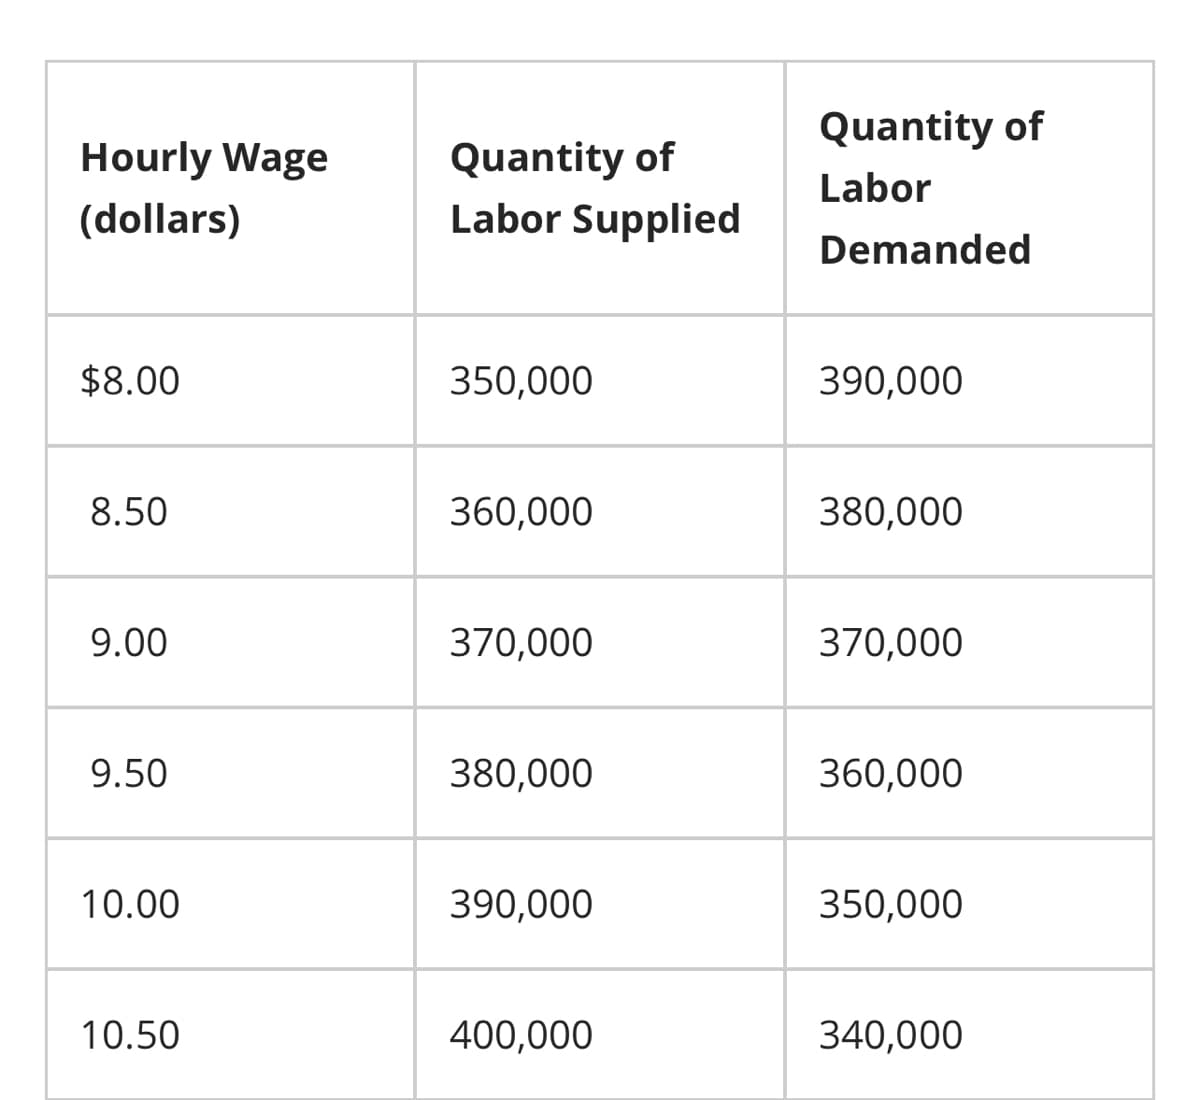 Hourly Wage
(dollars)
$8.00
8.50
9.00
9.50
10.00
10.50
Quantity of
Labor Supplied
350,000
360,000
370,000
380,000
390,000
400,000
Quantity of
Labor
Demanded
390,000
380,000
370,000
360,000
350,000
340,000